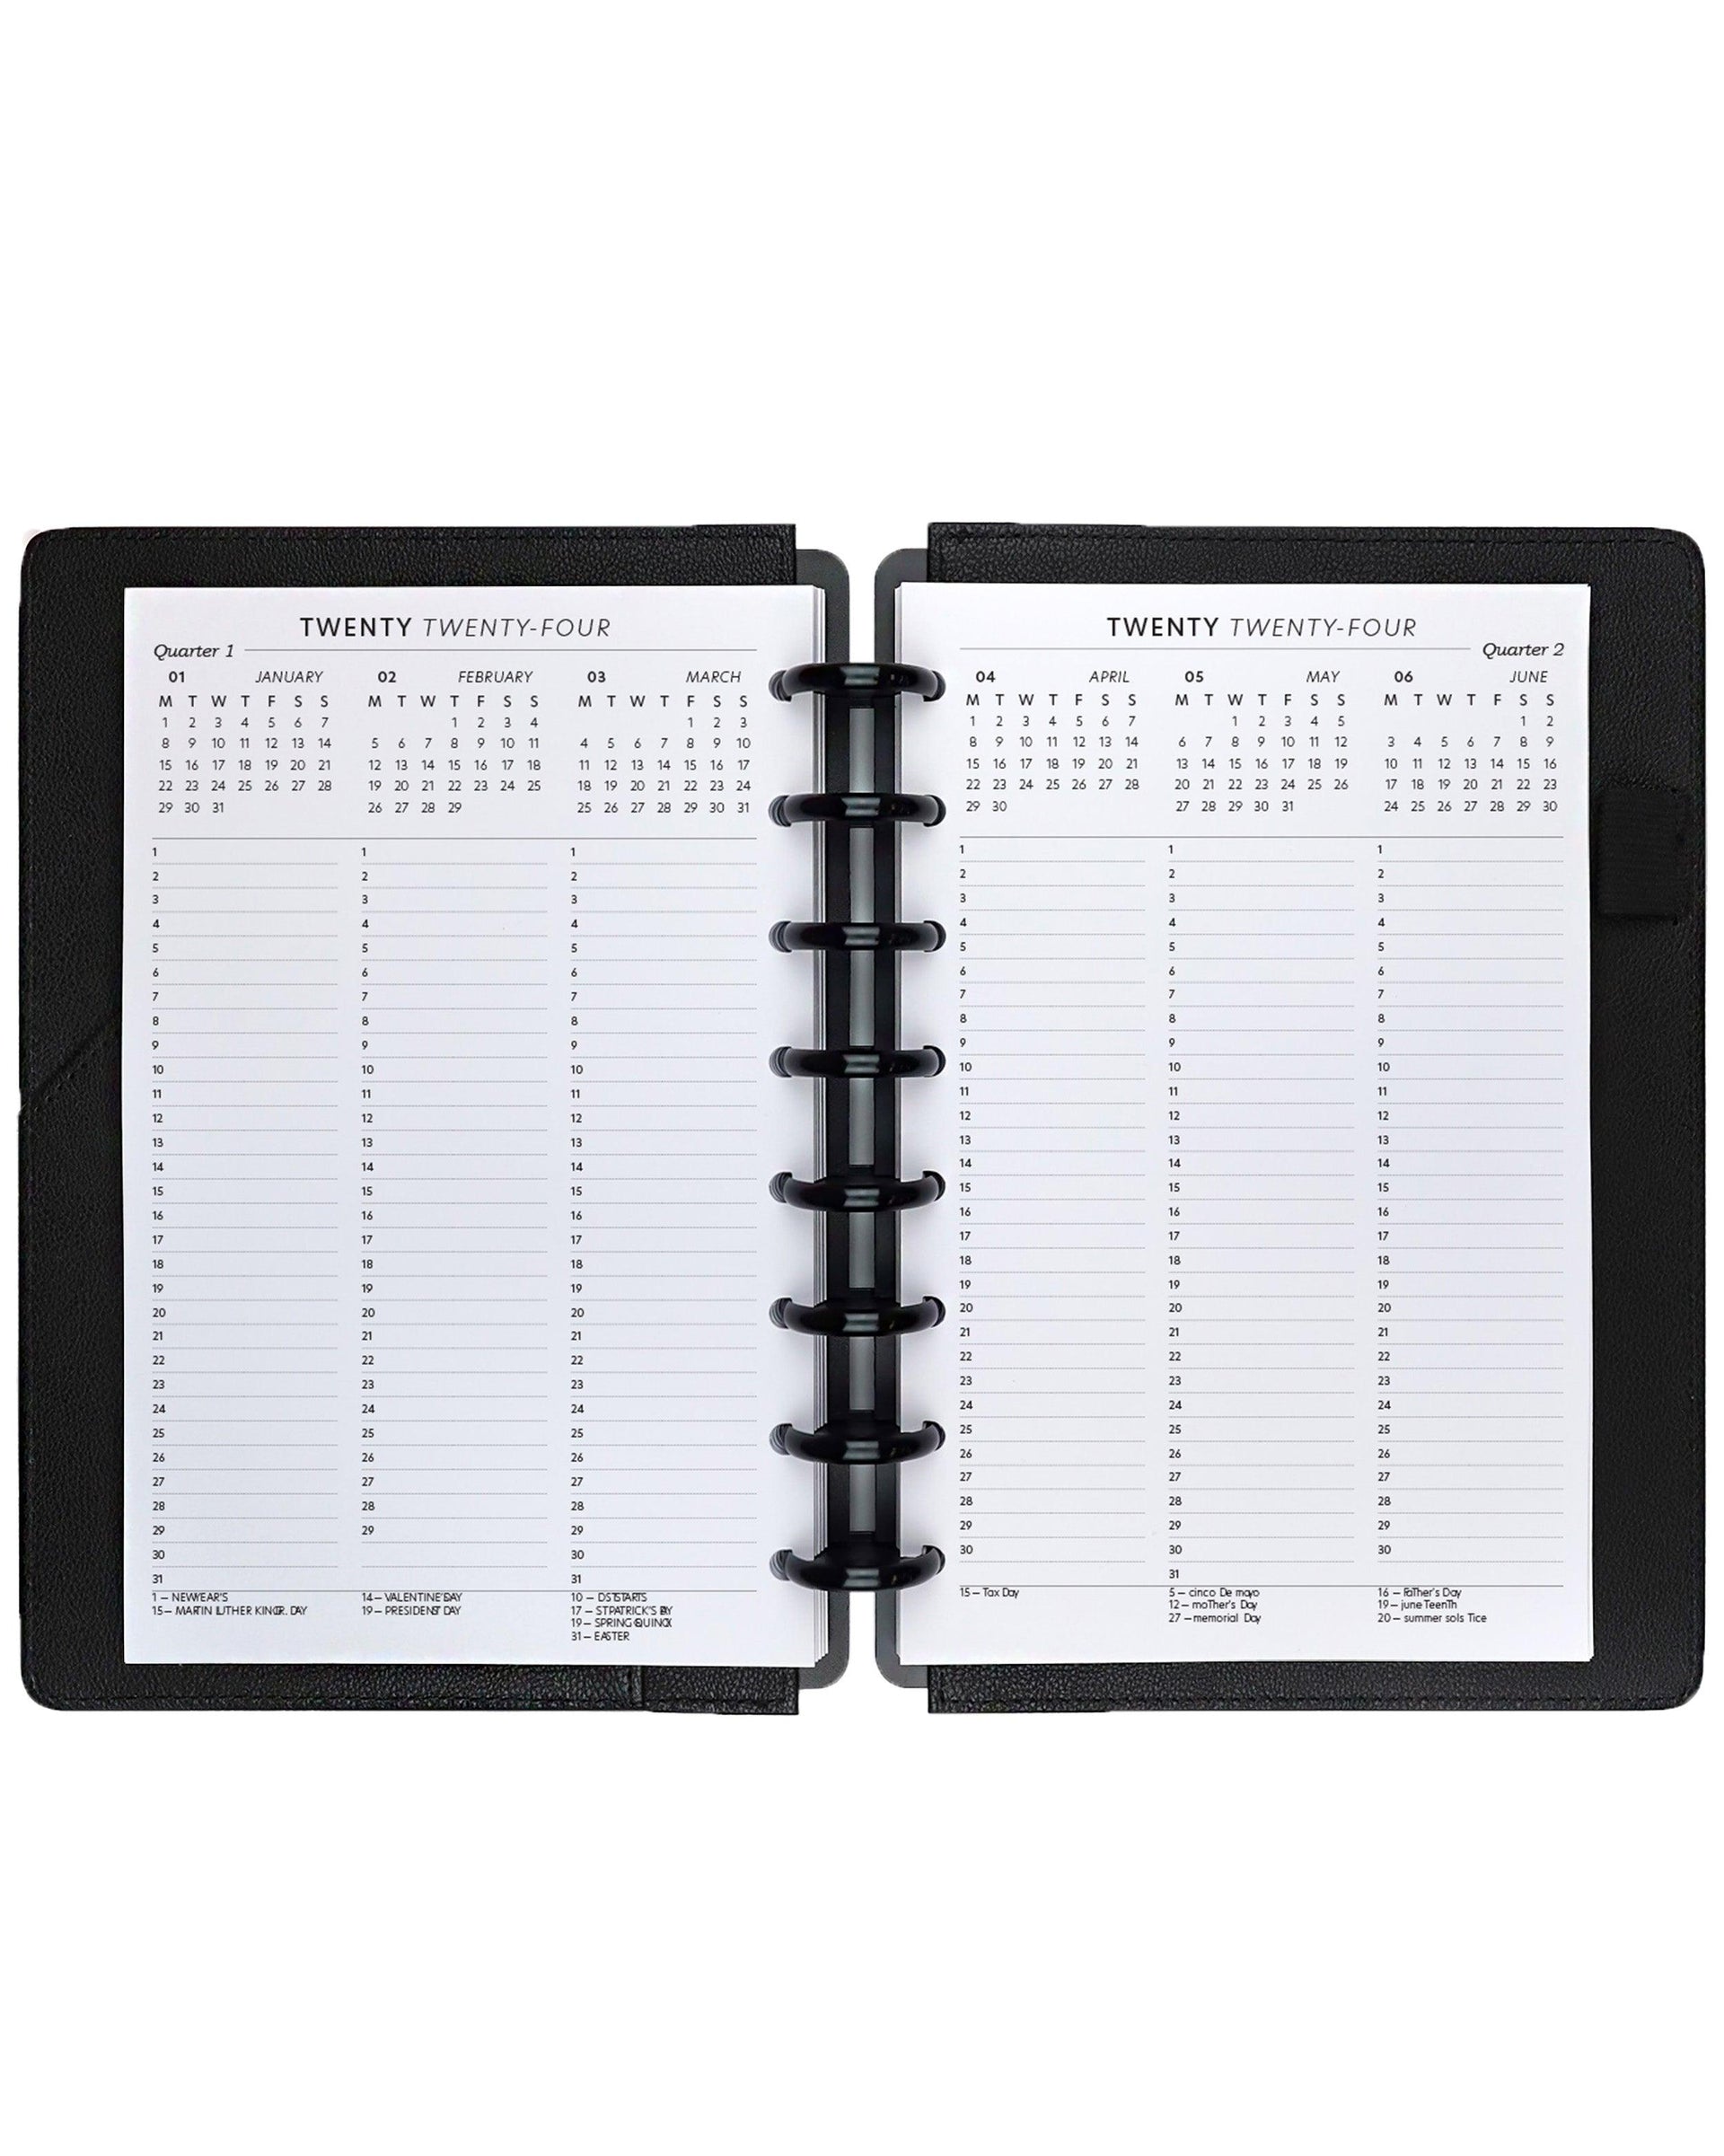 Lifestyle Focus Planner Inserts for Discbound or Ring Planners